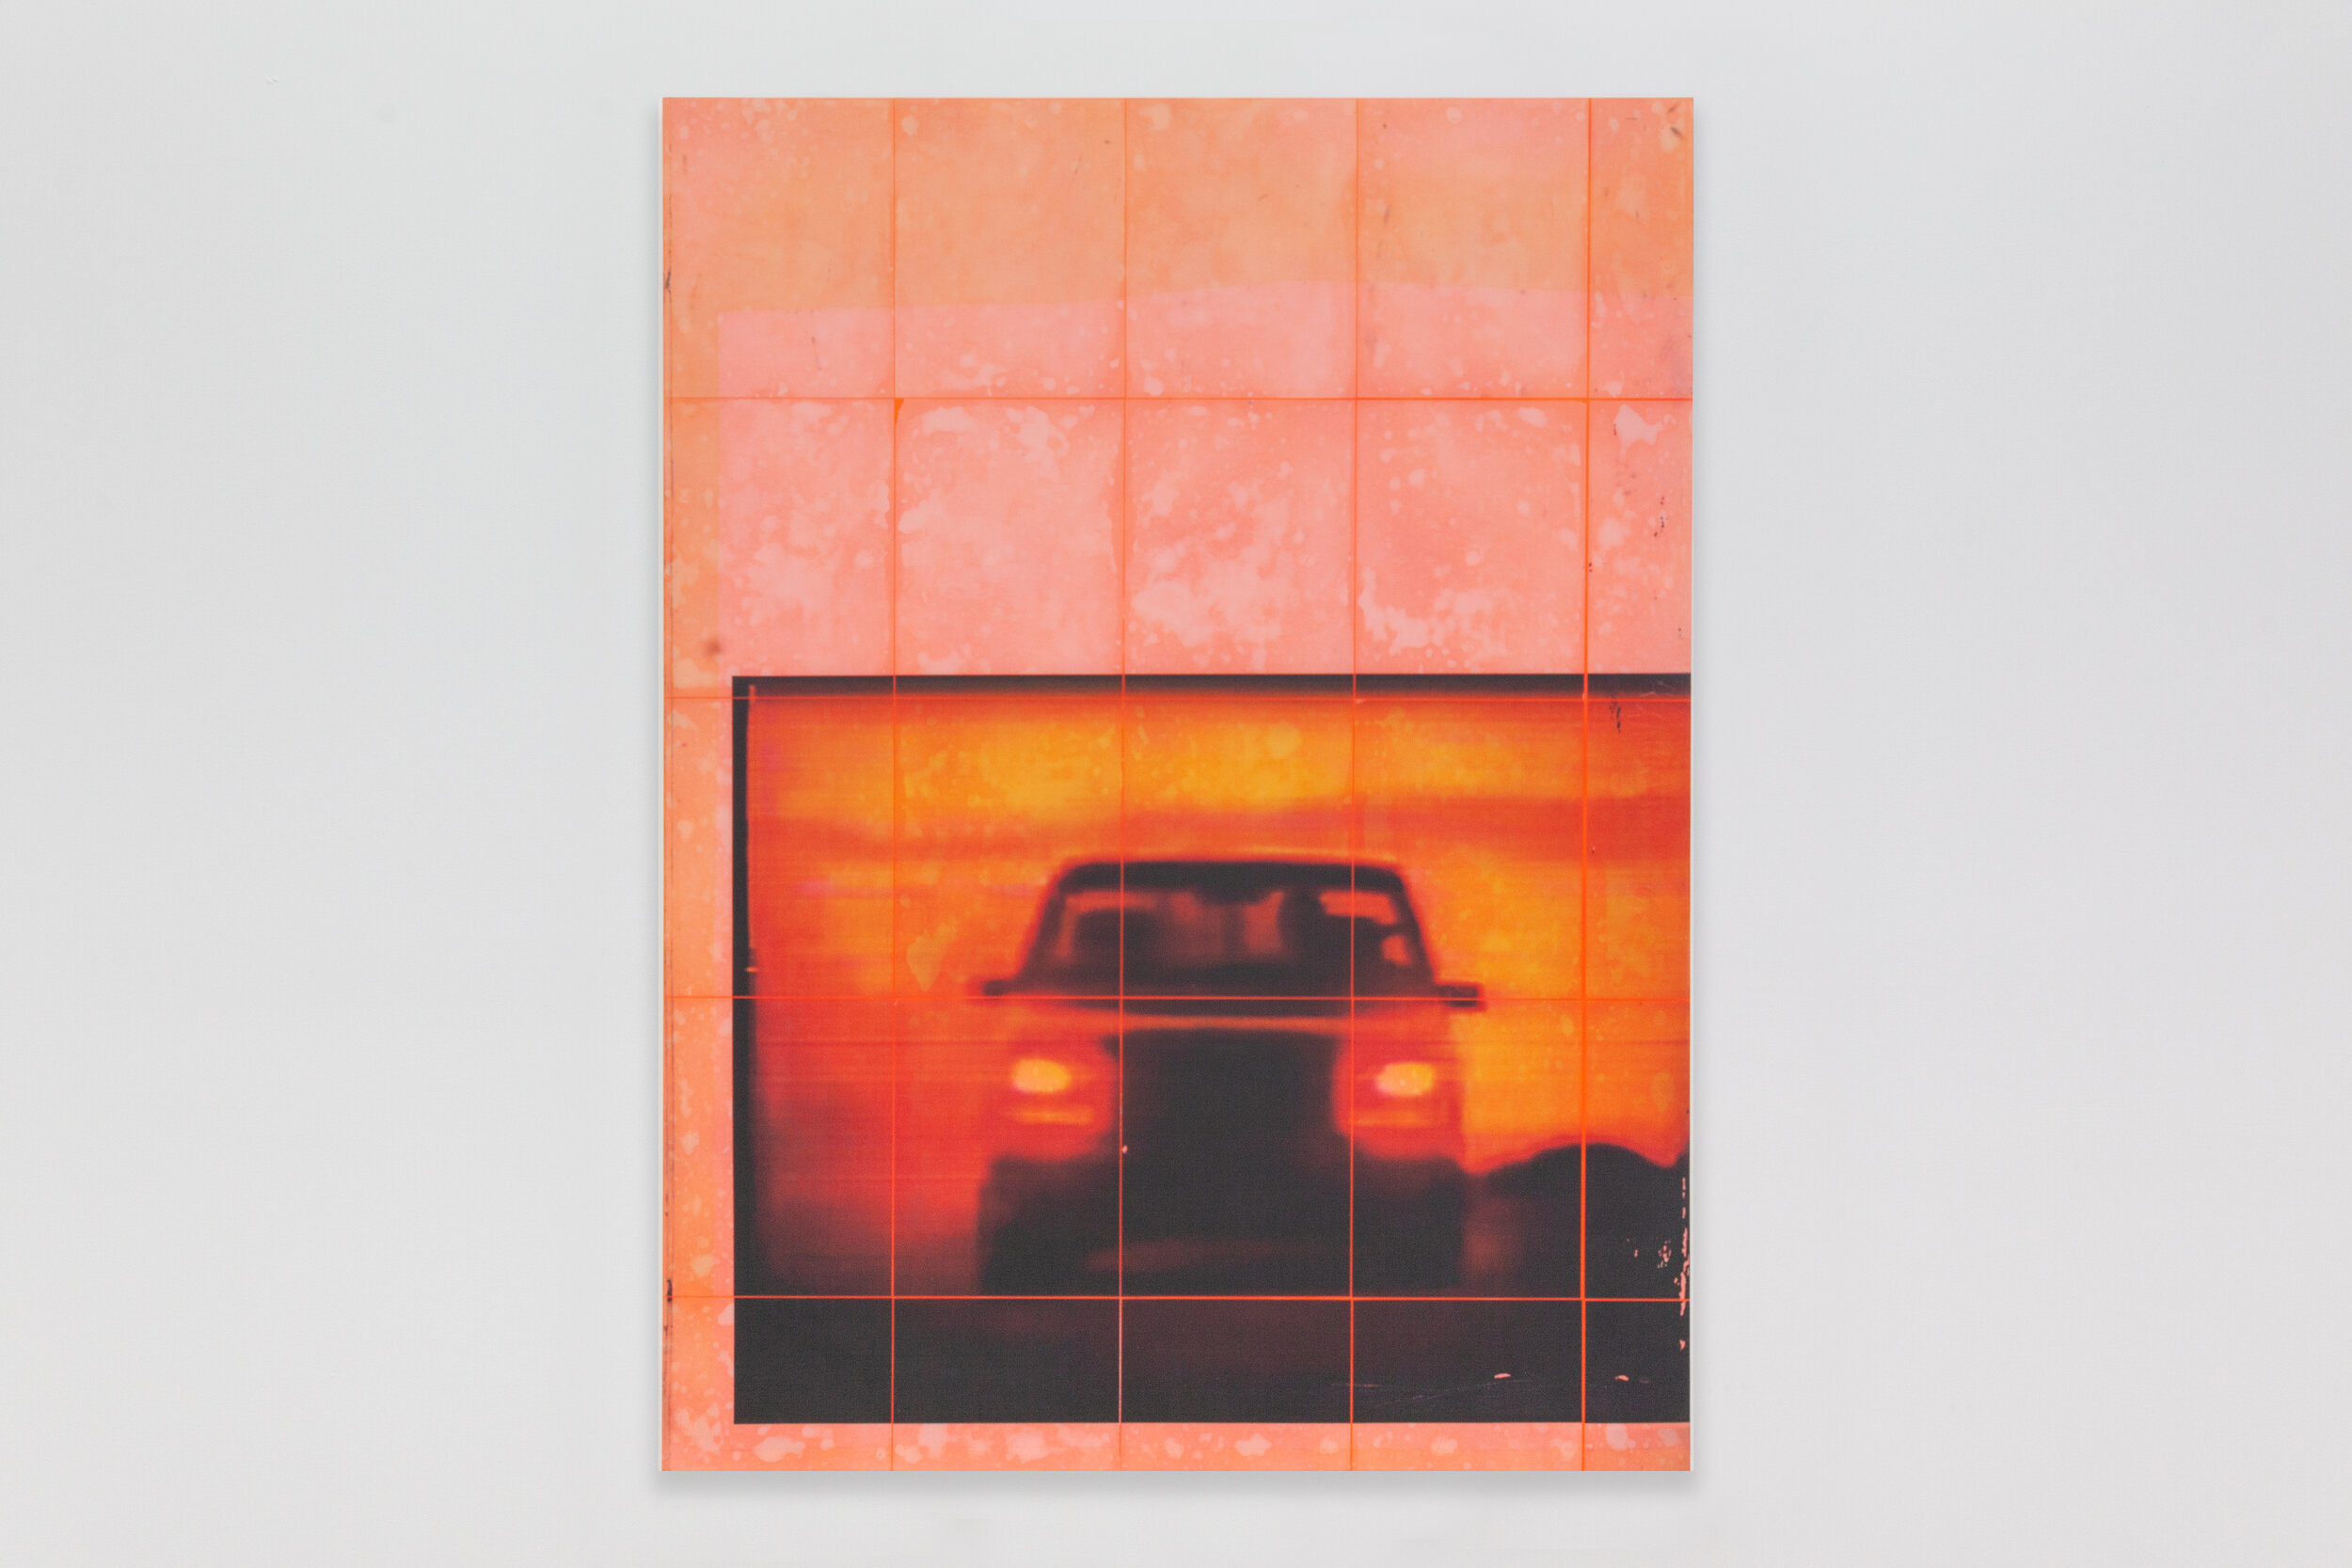  Stephen McClintock, Bowtie (Truck in the Sunset), 2020, mixed media and resin on aluminum panel, 48 x 36 in. (121.9 x 91.4 cm) 